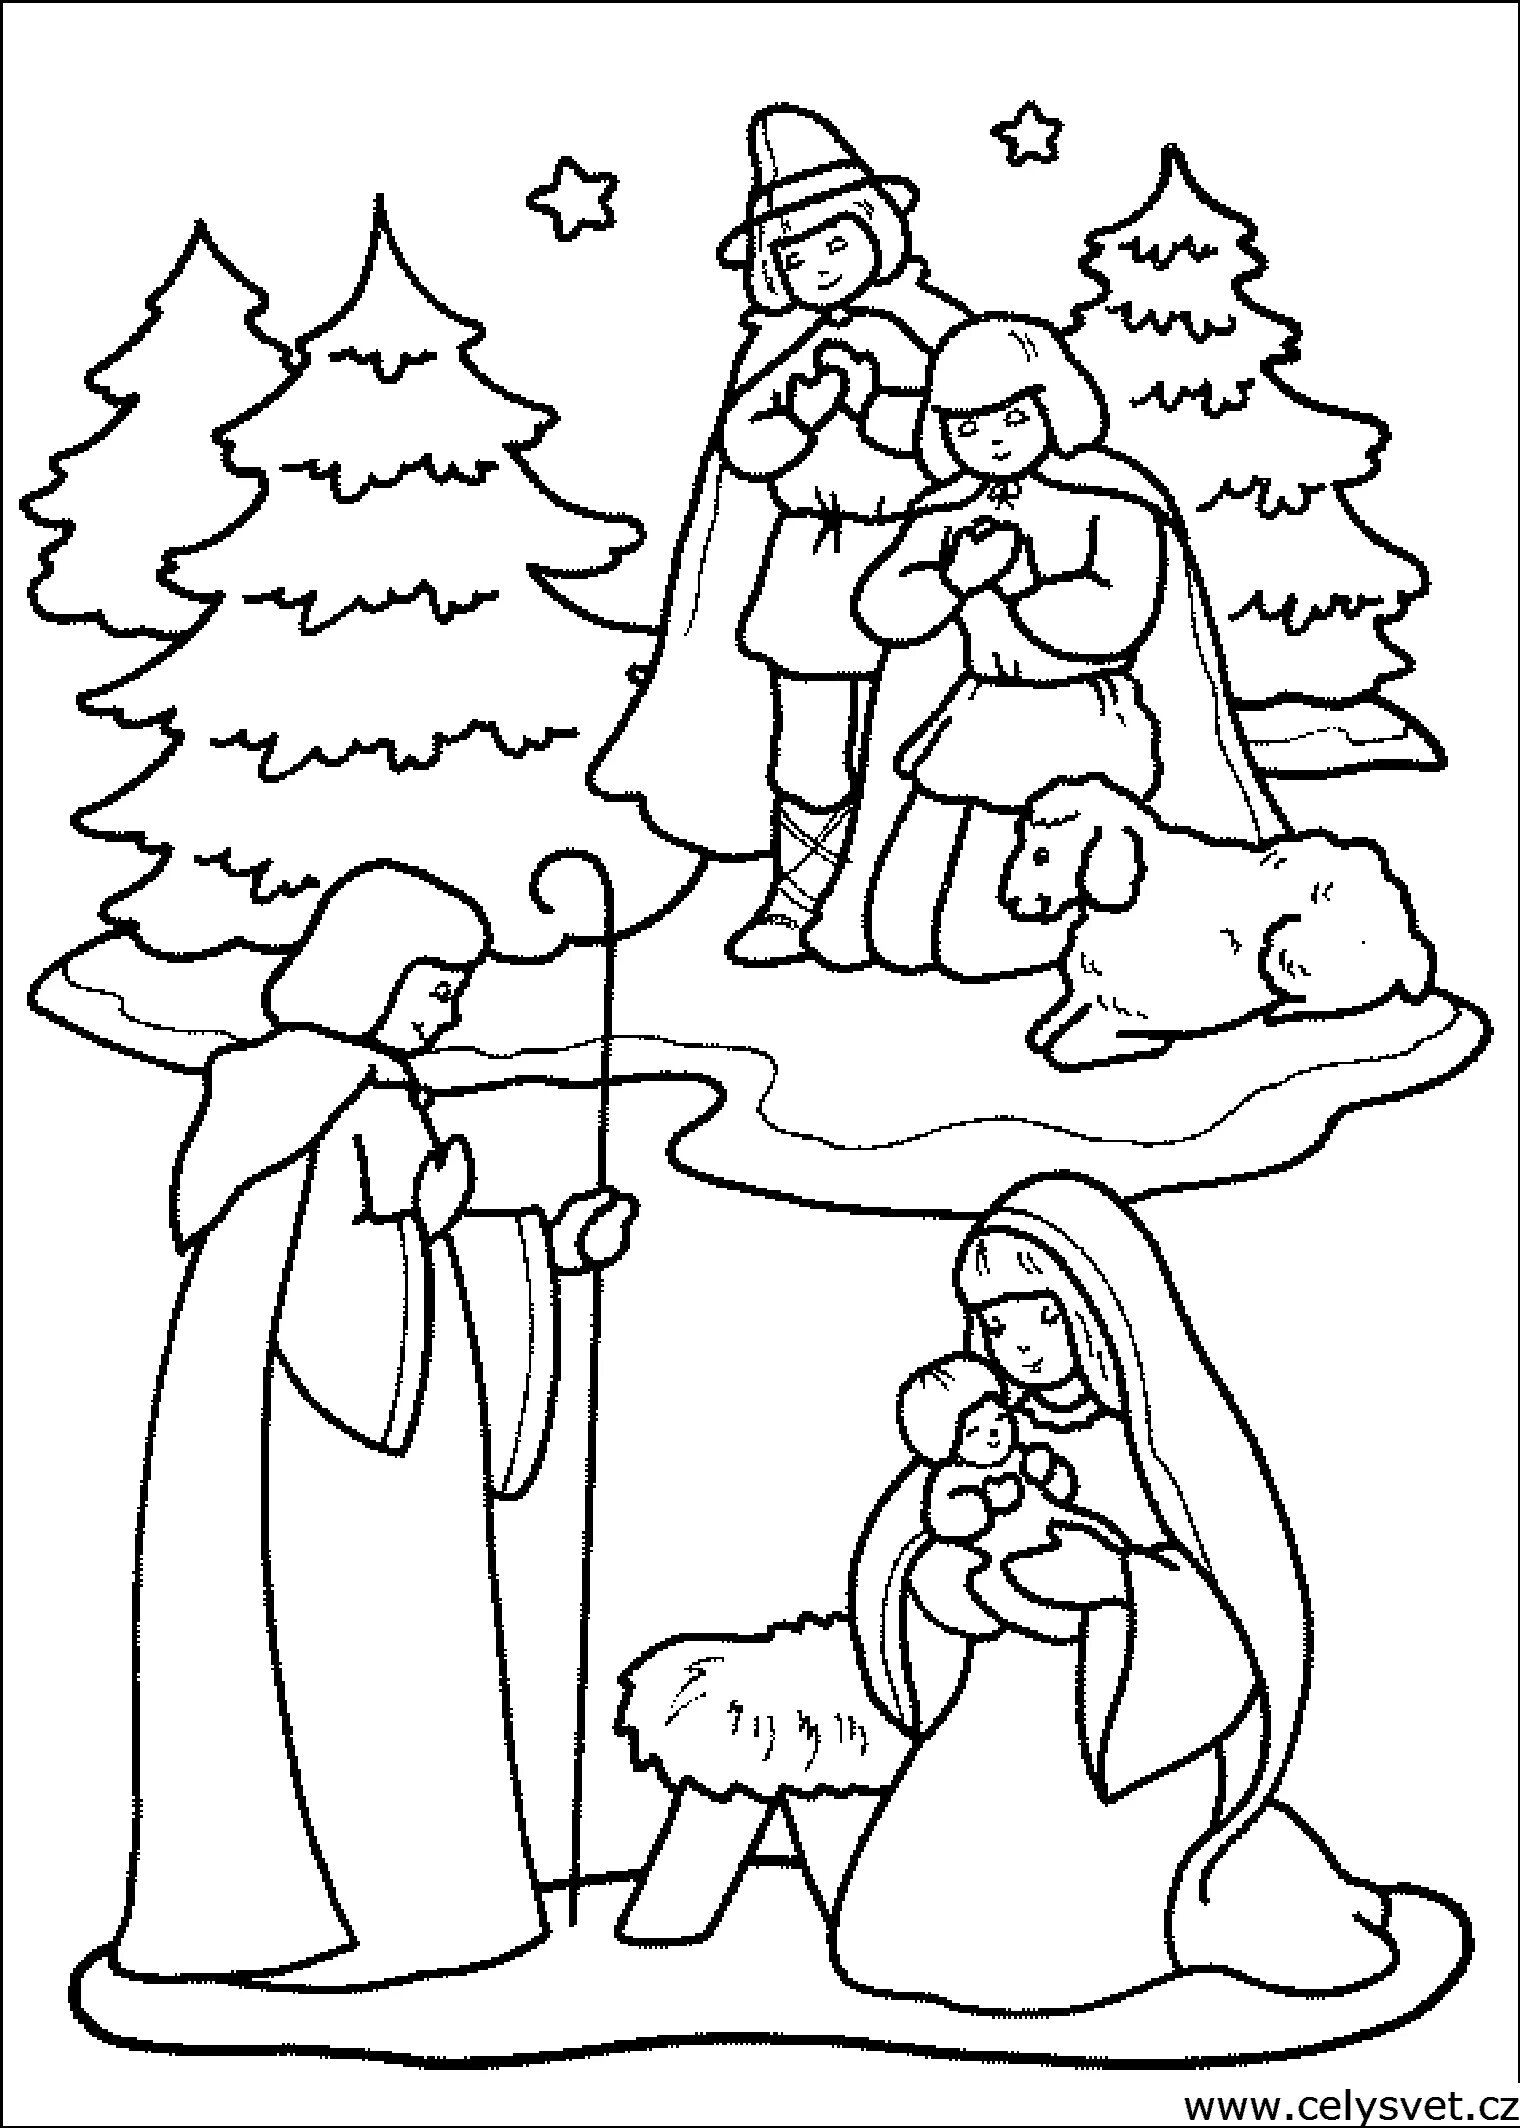 Coloring book touching Christmas story